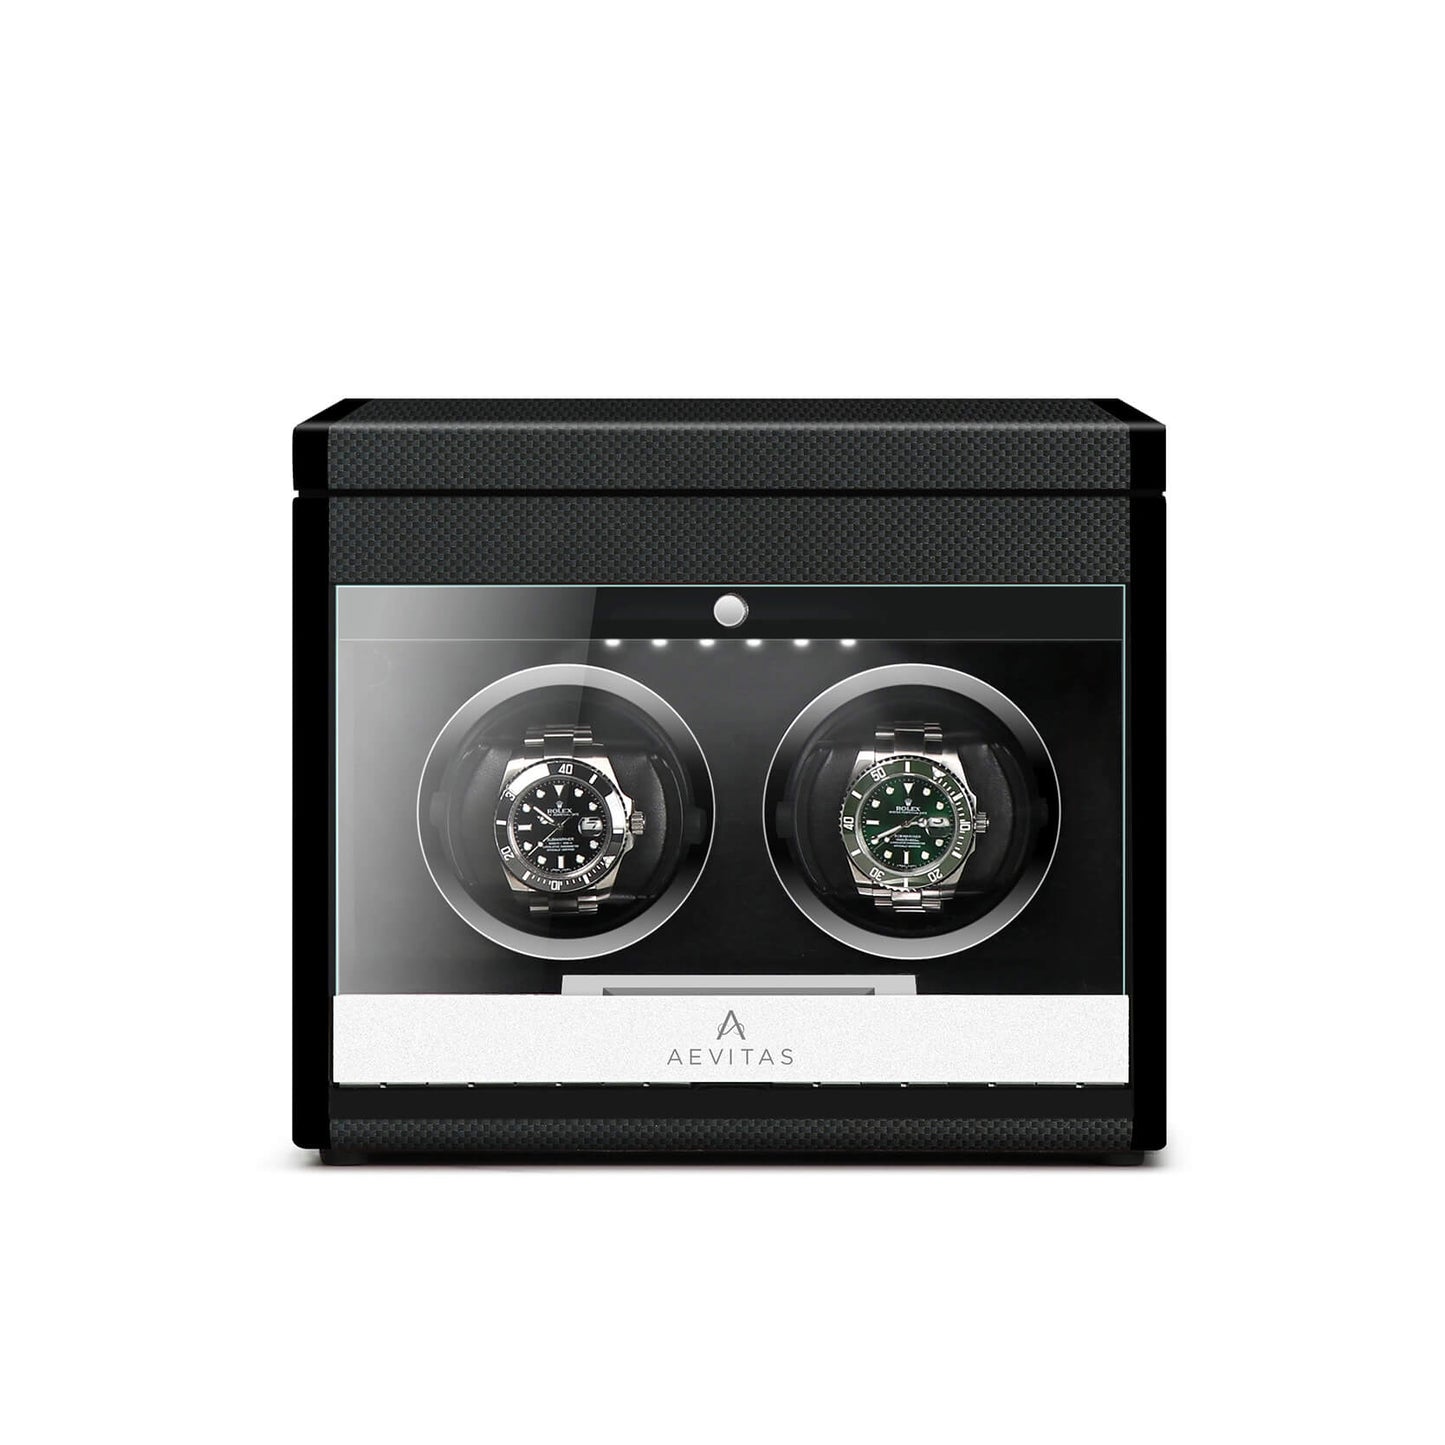 2 Watch Winder Carbon Fibre with Extra Storage Area by Aevitas